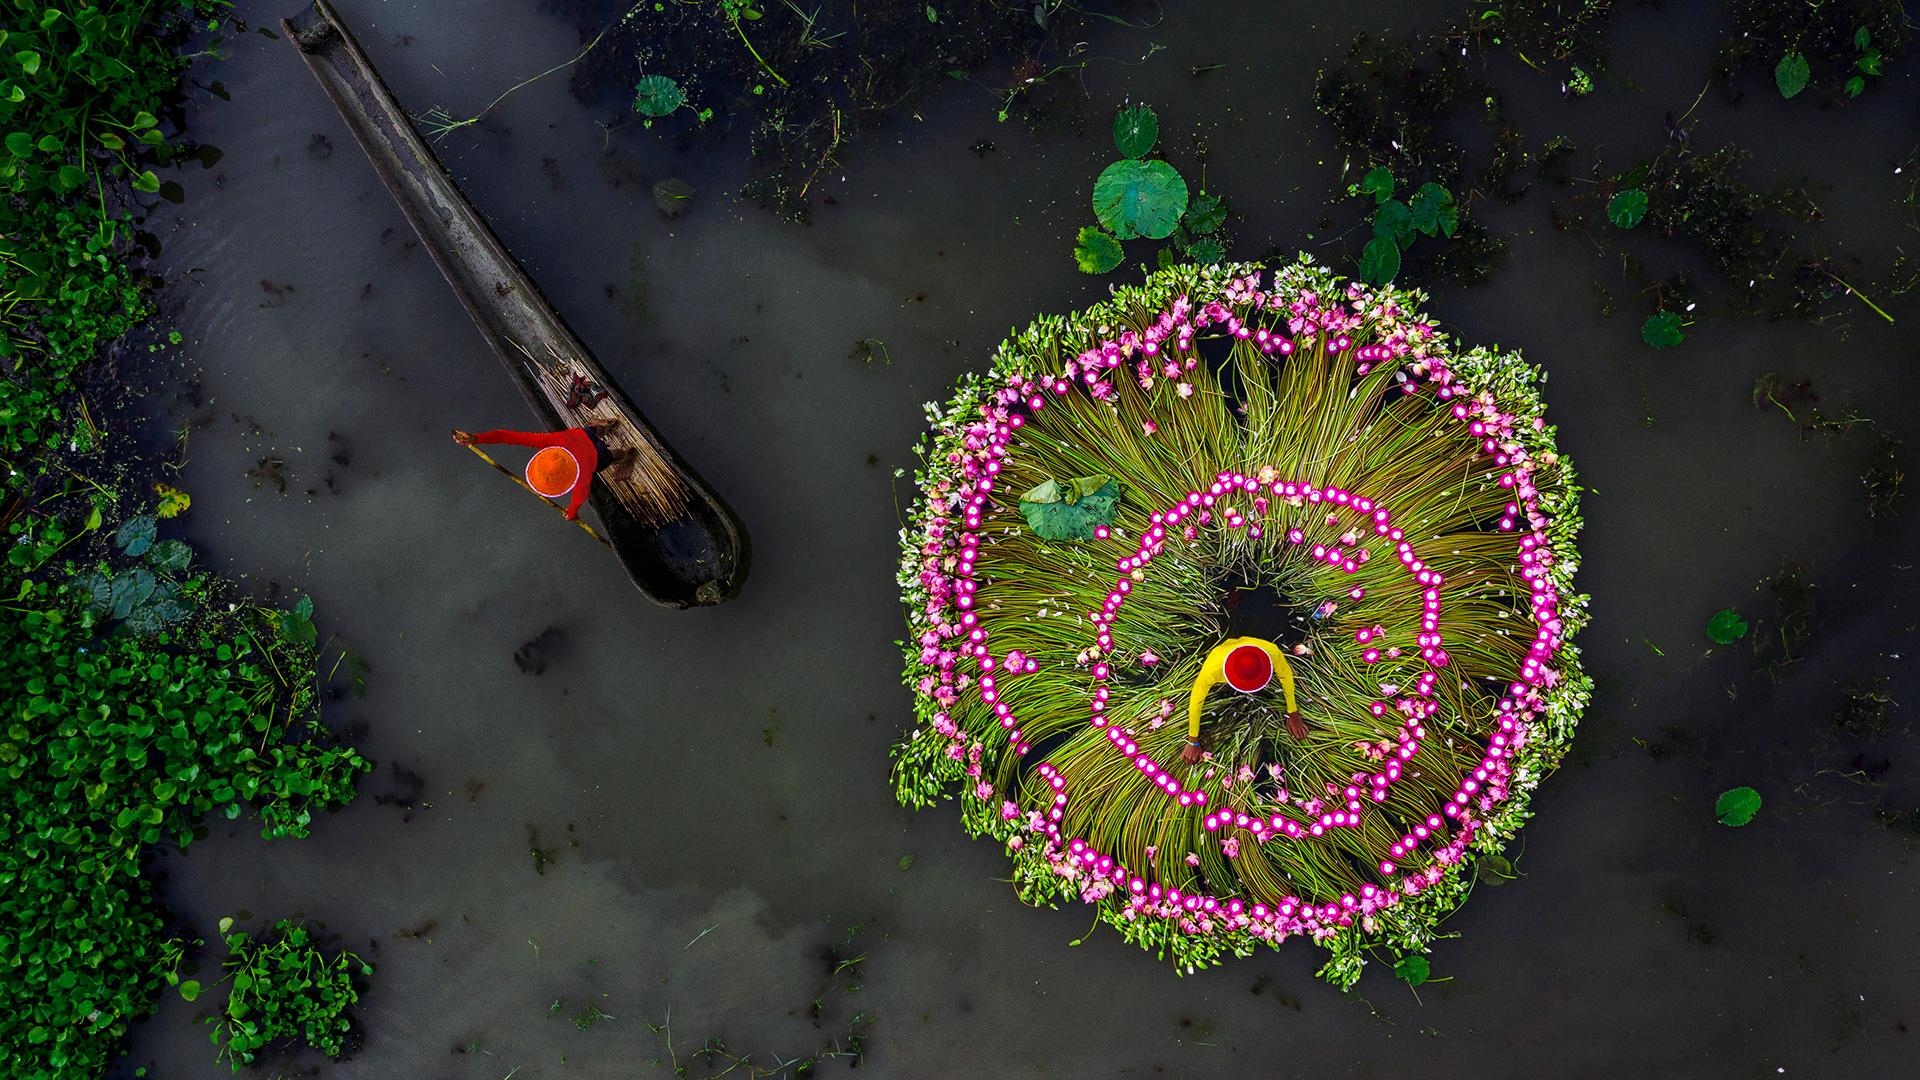 This astonishing view of the annual harvest of (edible) water lilies in Bengal may reflect the shared determination of SCO members: the future may look bleak, but there is a glimmer of hope if we all act together now.